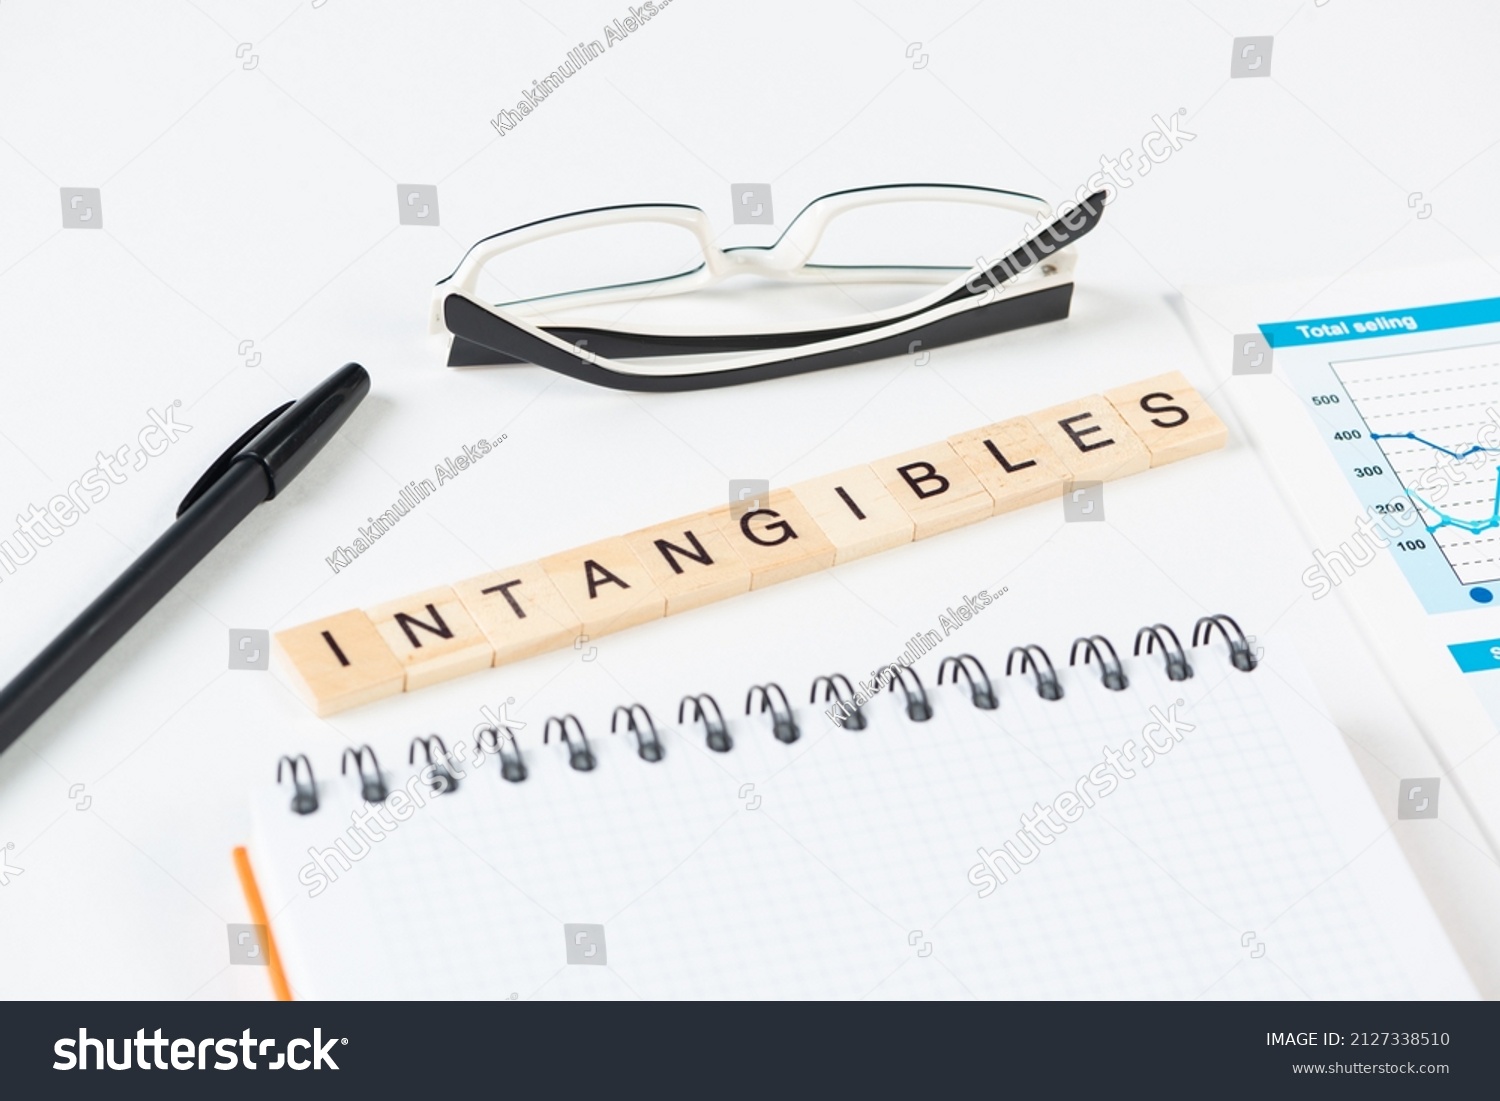 Intangibles concept with letters on wooden cubes. Still life of office workplace with supplies. Flat lay white surface with glasses, pen and notepad. Intellectual capital and property. #2127338510